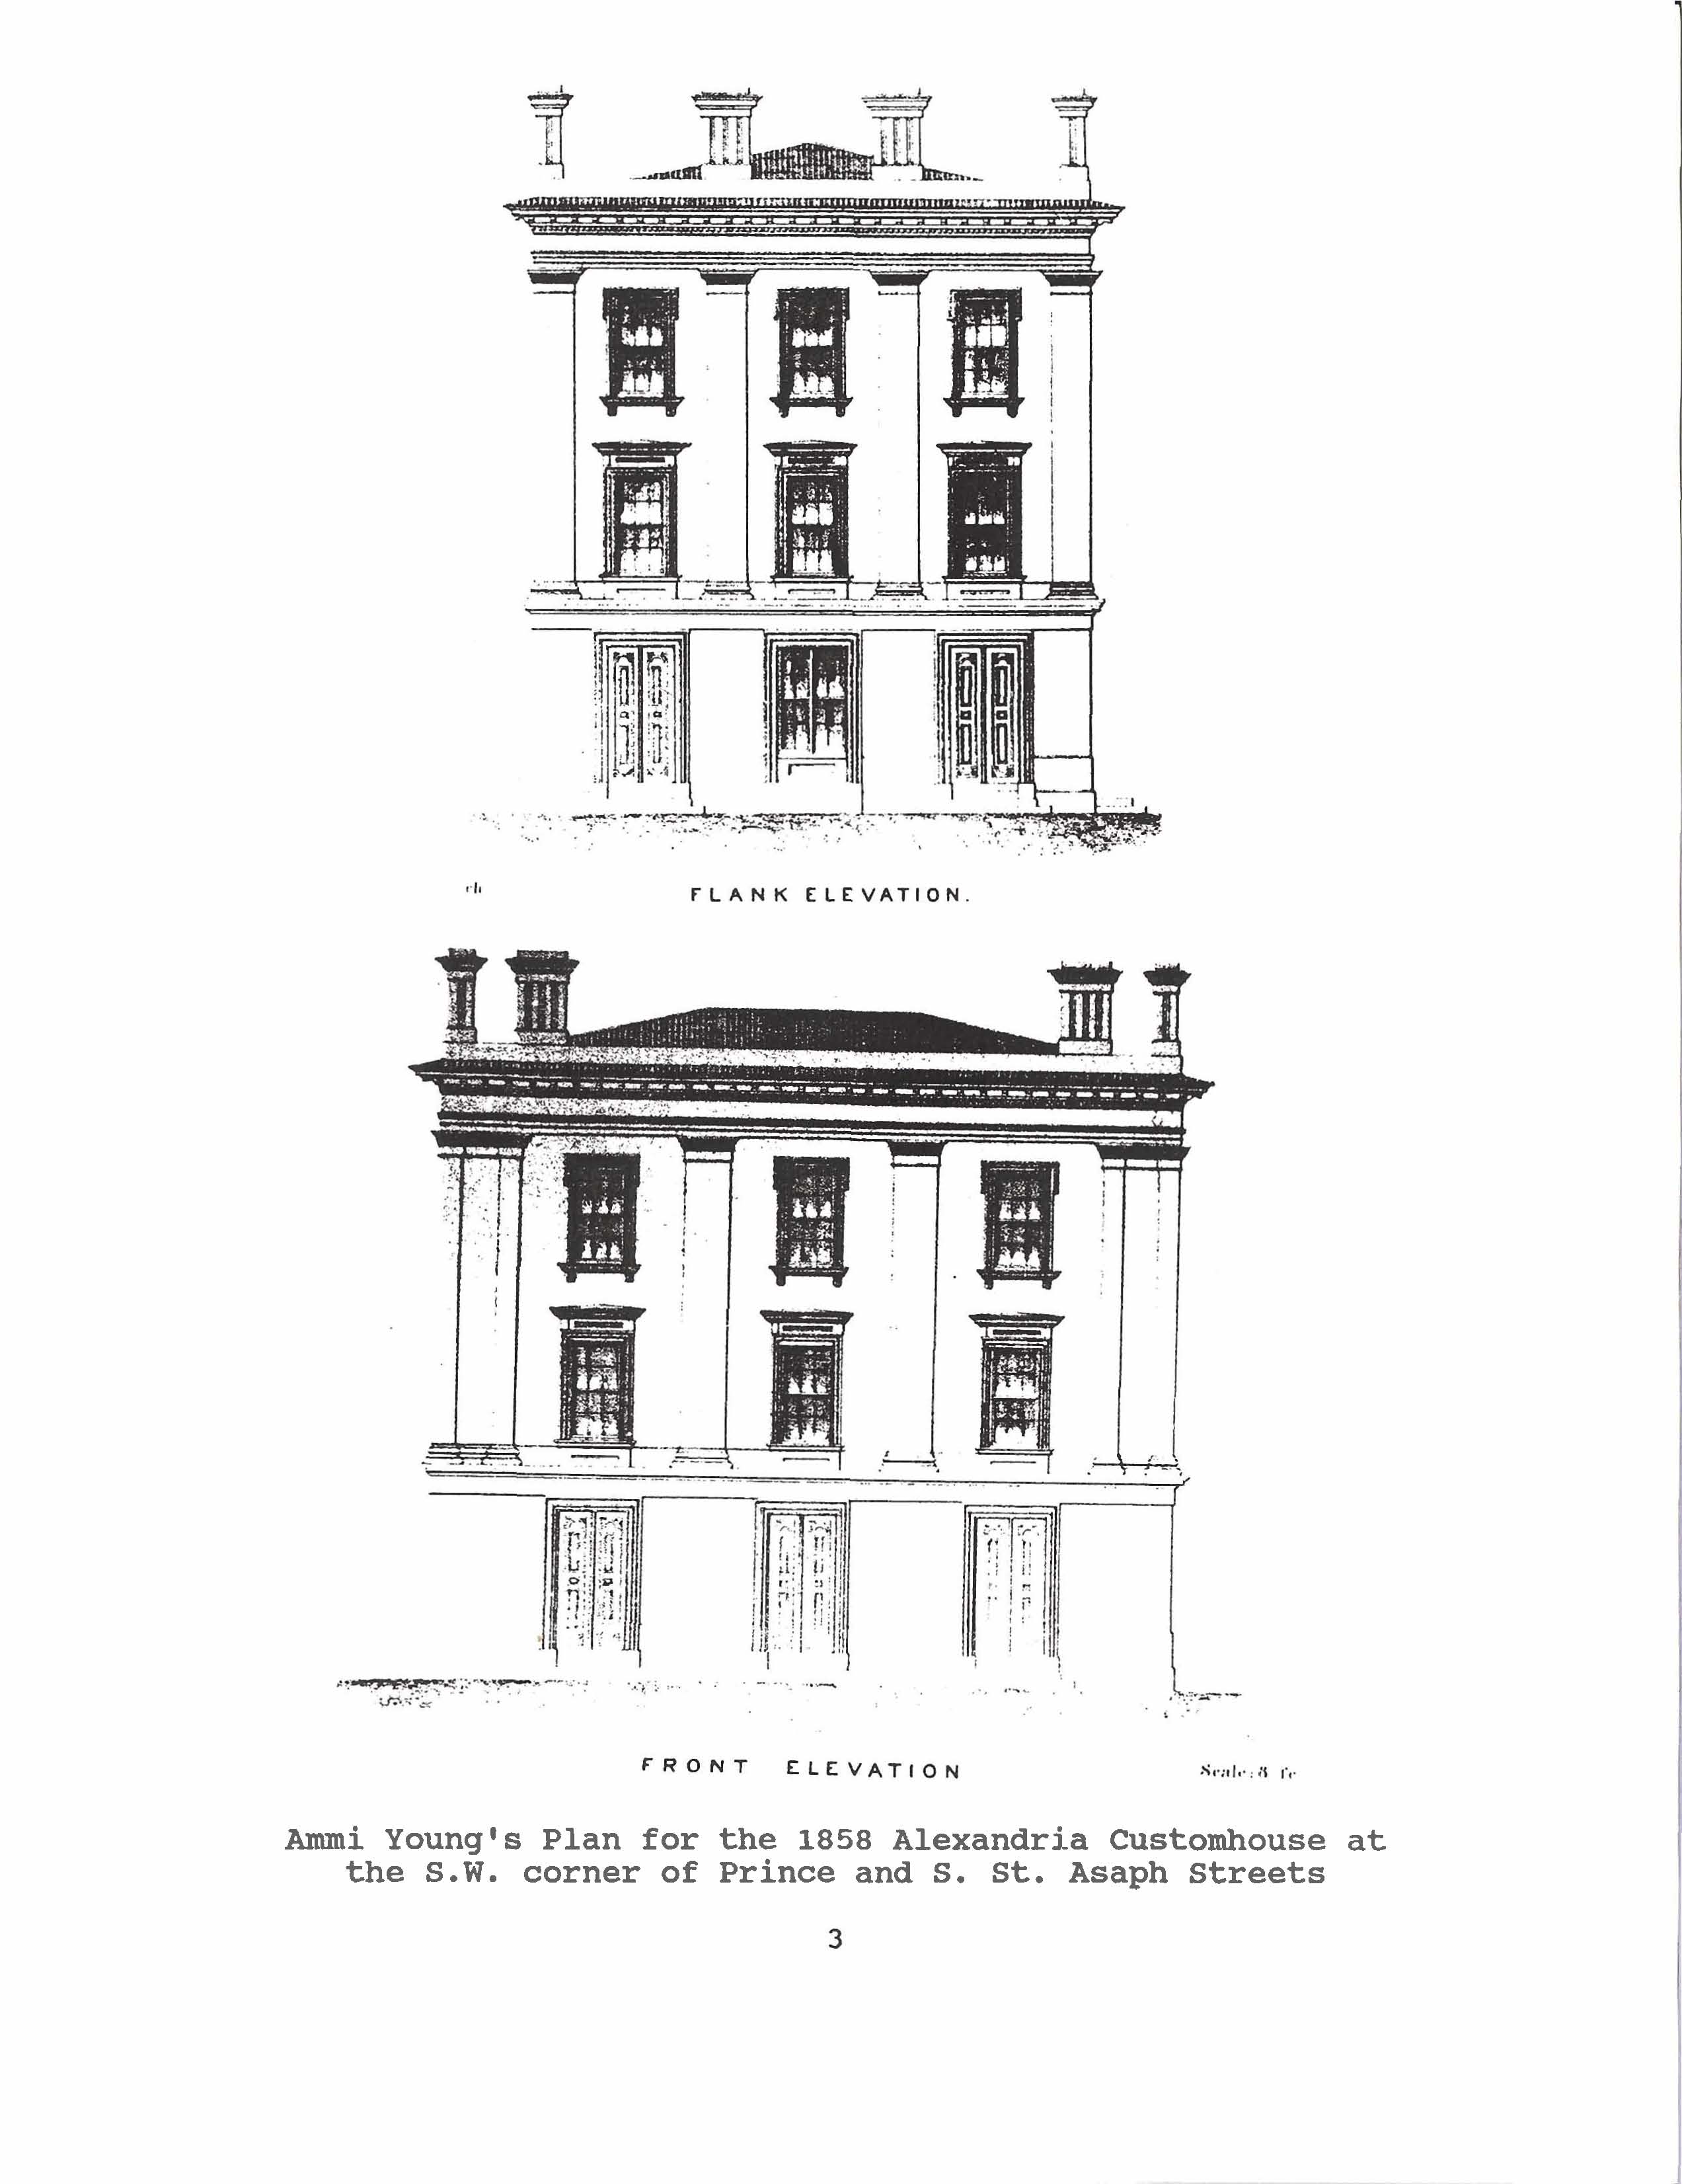 Ammi B. Young, Supervising Architect of the Treasury and his 1858 Alexandria Post Office and Customhouse, page 3 of 16